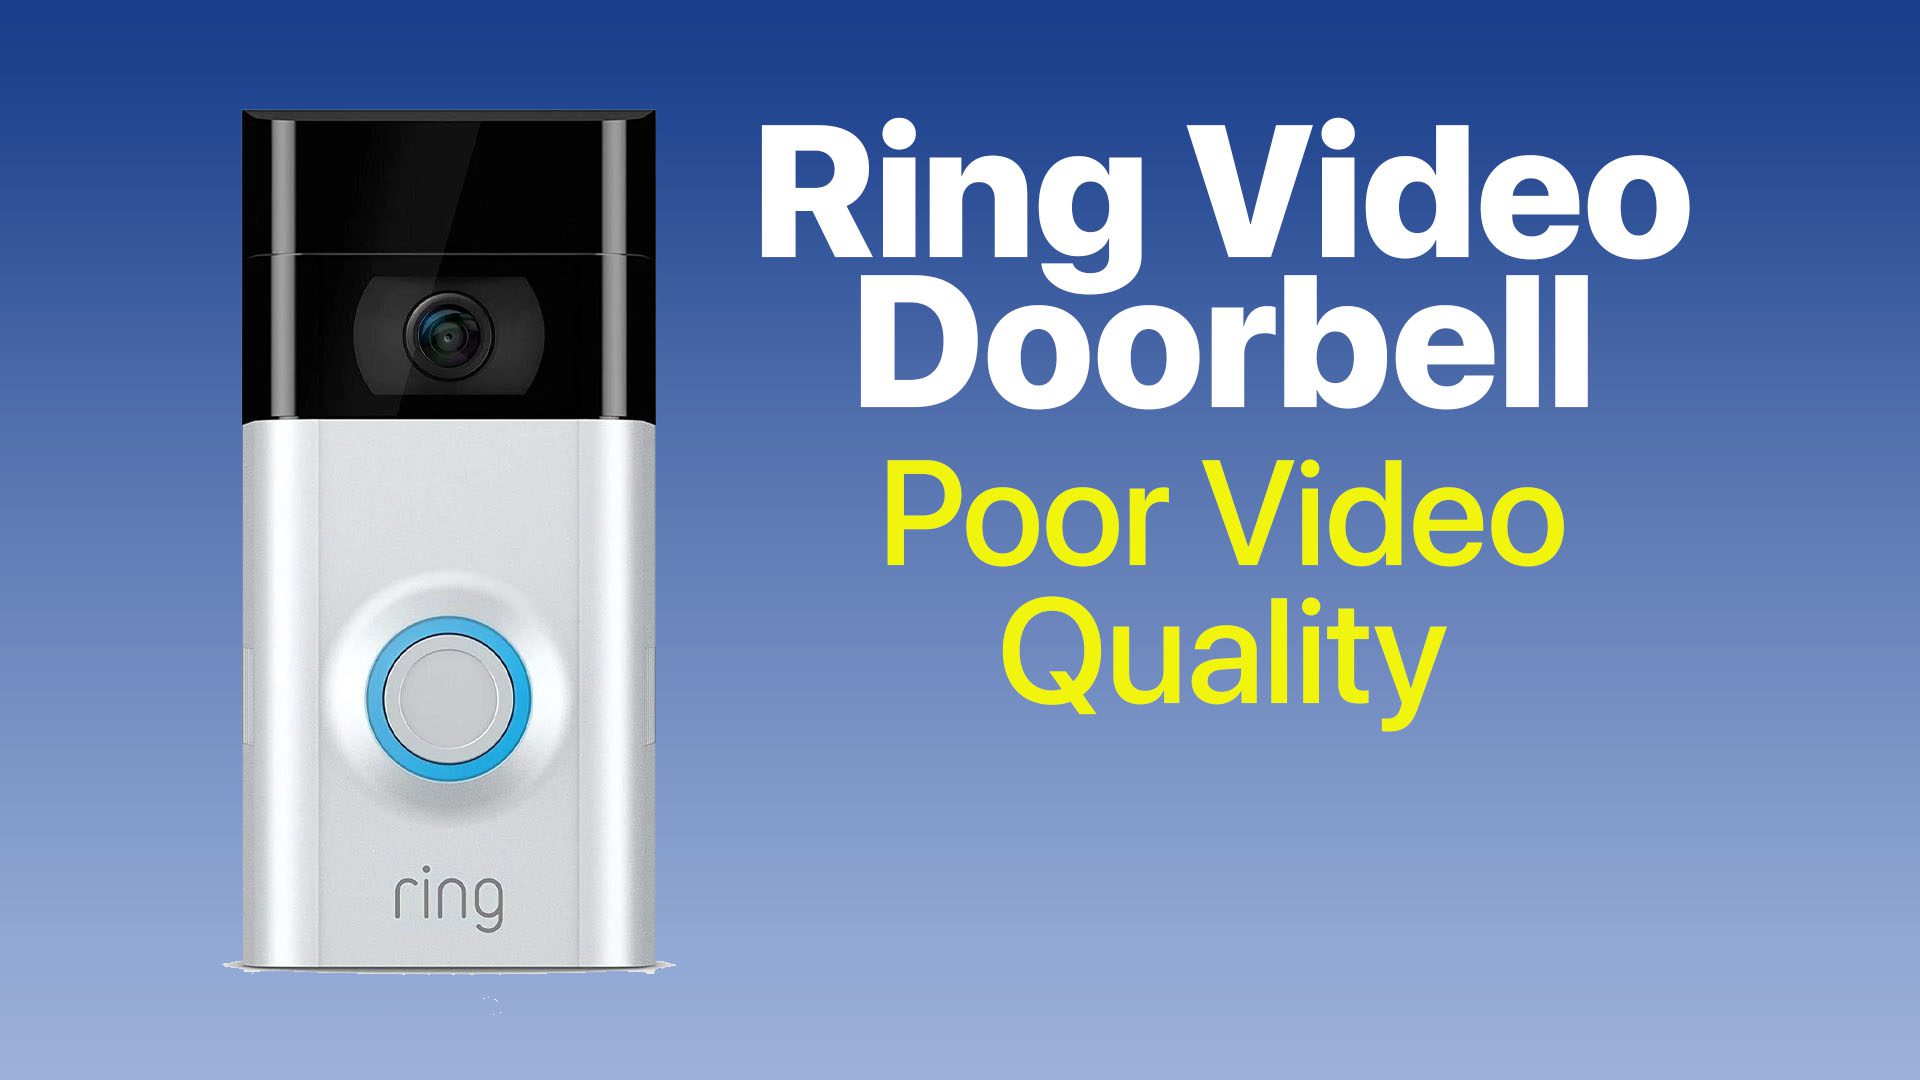 Deteriorating Video Quality on a Ring Video Doorbell